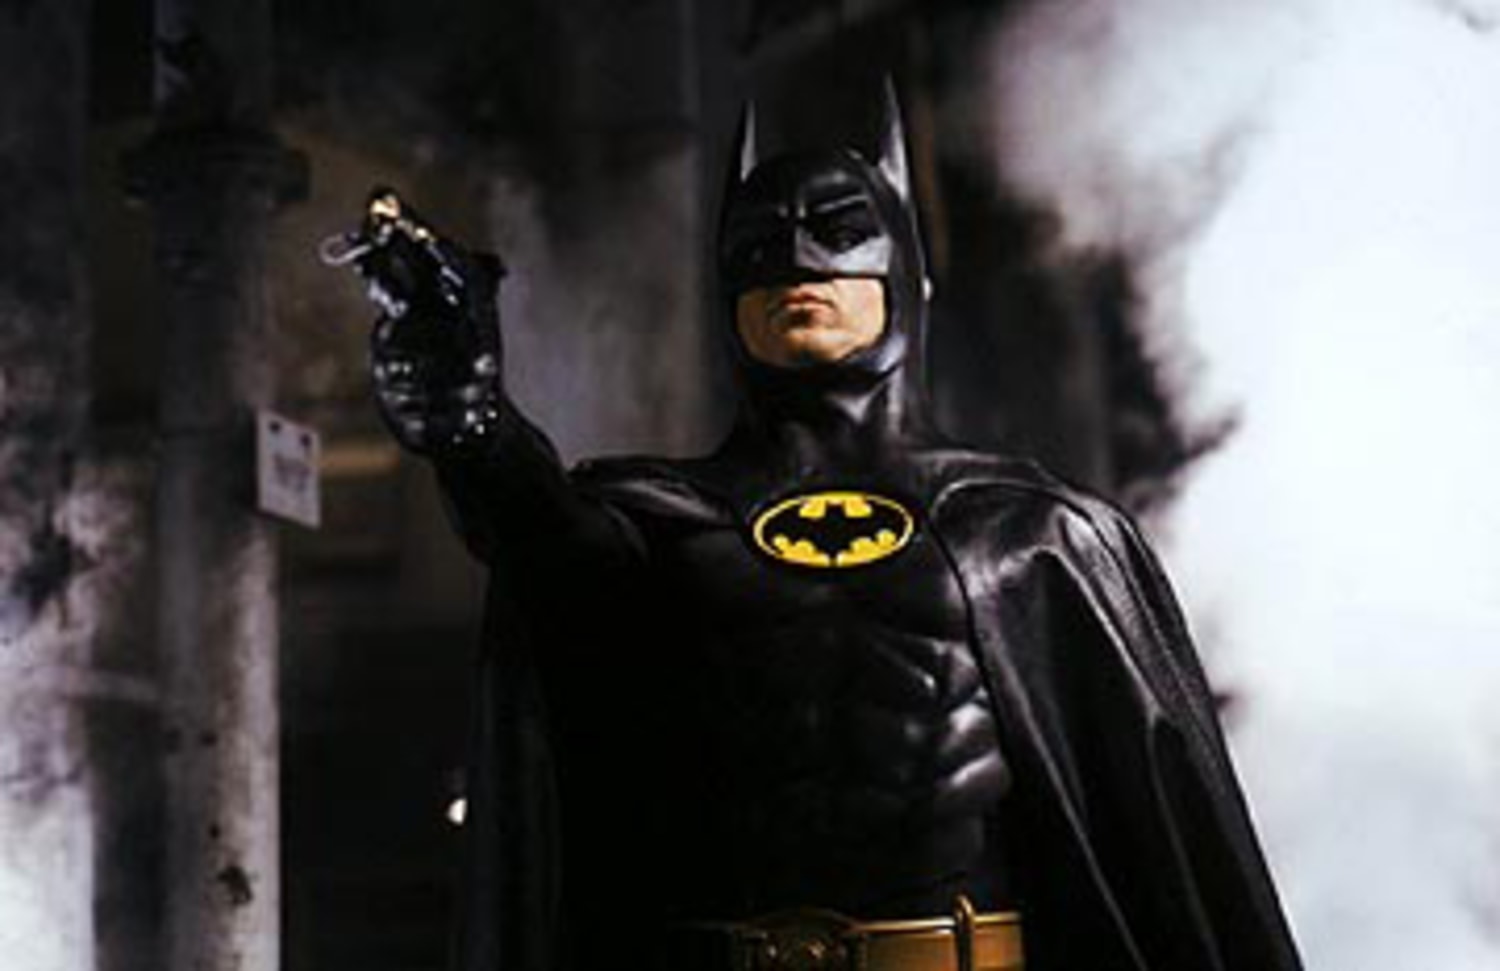 Batman' by the numbers: 25 years, 5 actors, 7 movies and billions of dollars